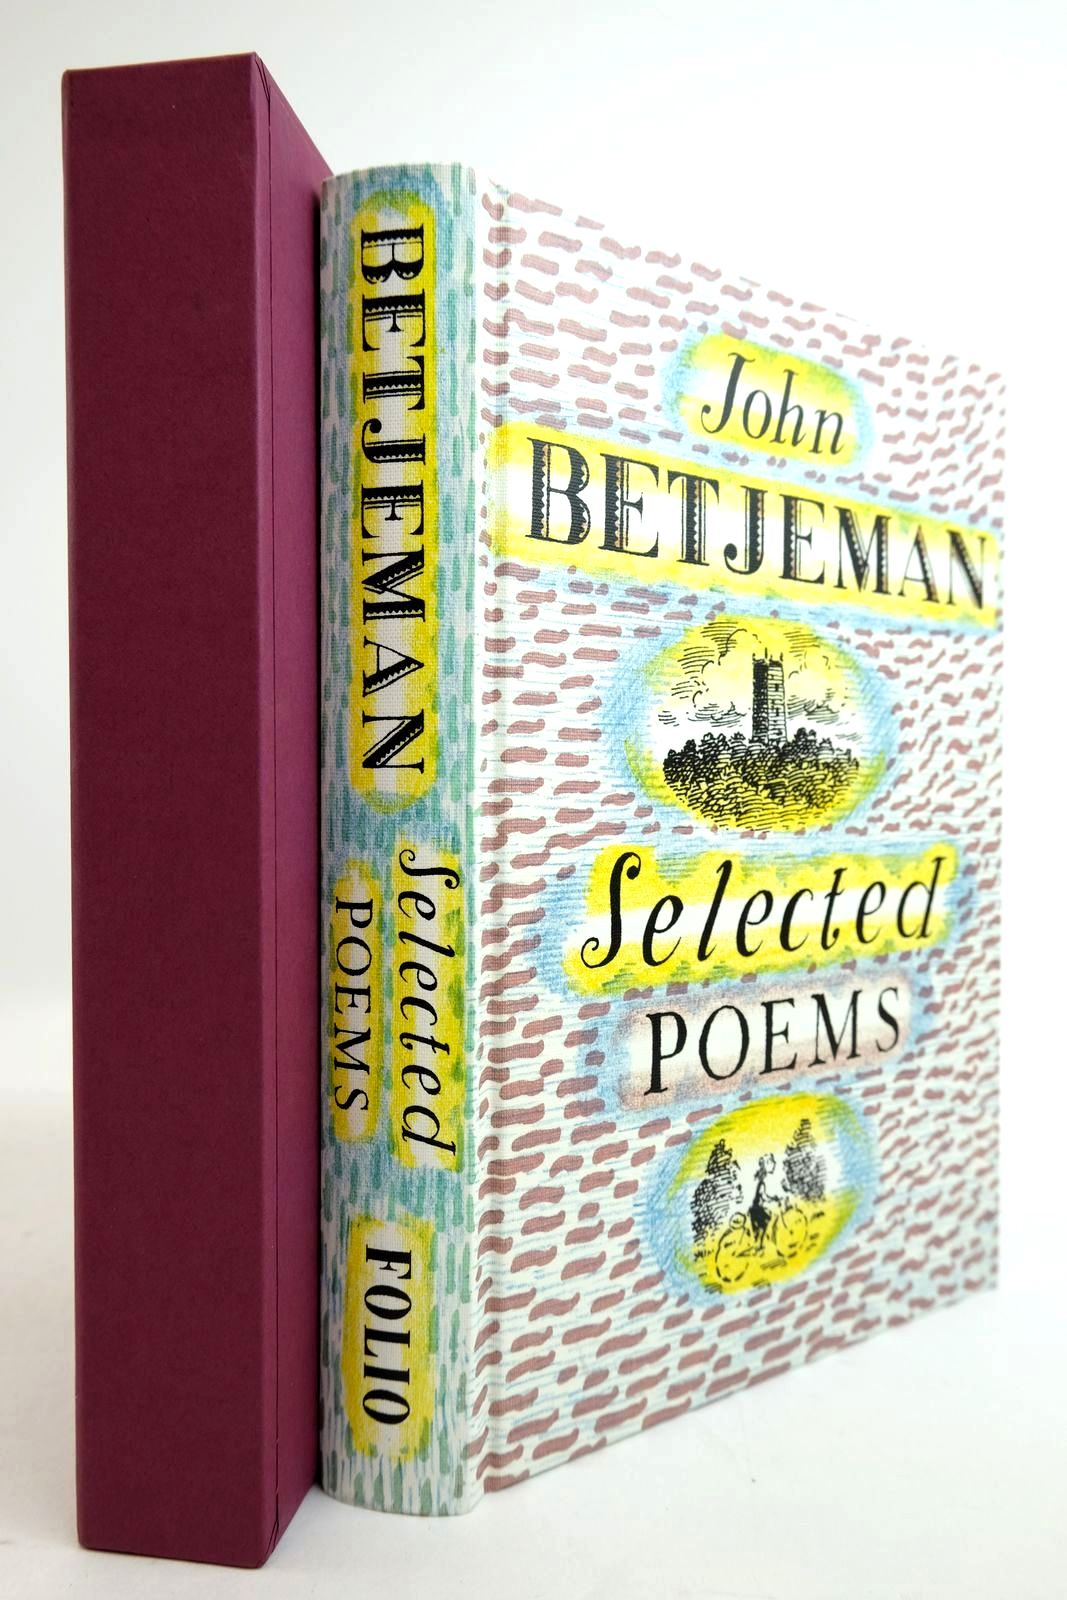 Photo of JOHN BETJEMAN SELECTED POEMS written by Betjeman, John Powers, Alan illustrated by Bailey, Peter published by Folio Society (STOCK CODE: 2134359)  for sale by Stella & Rose's Books